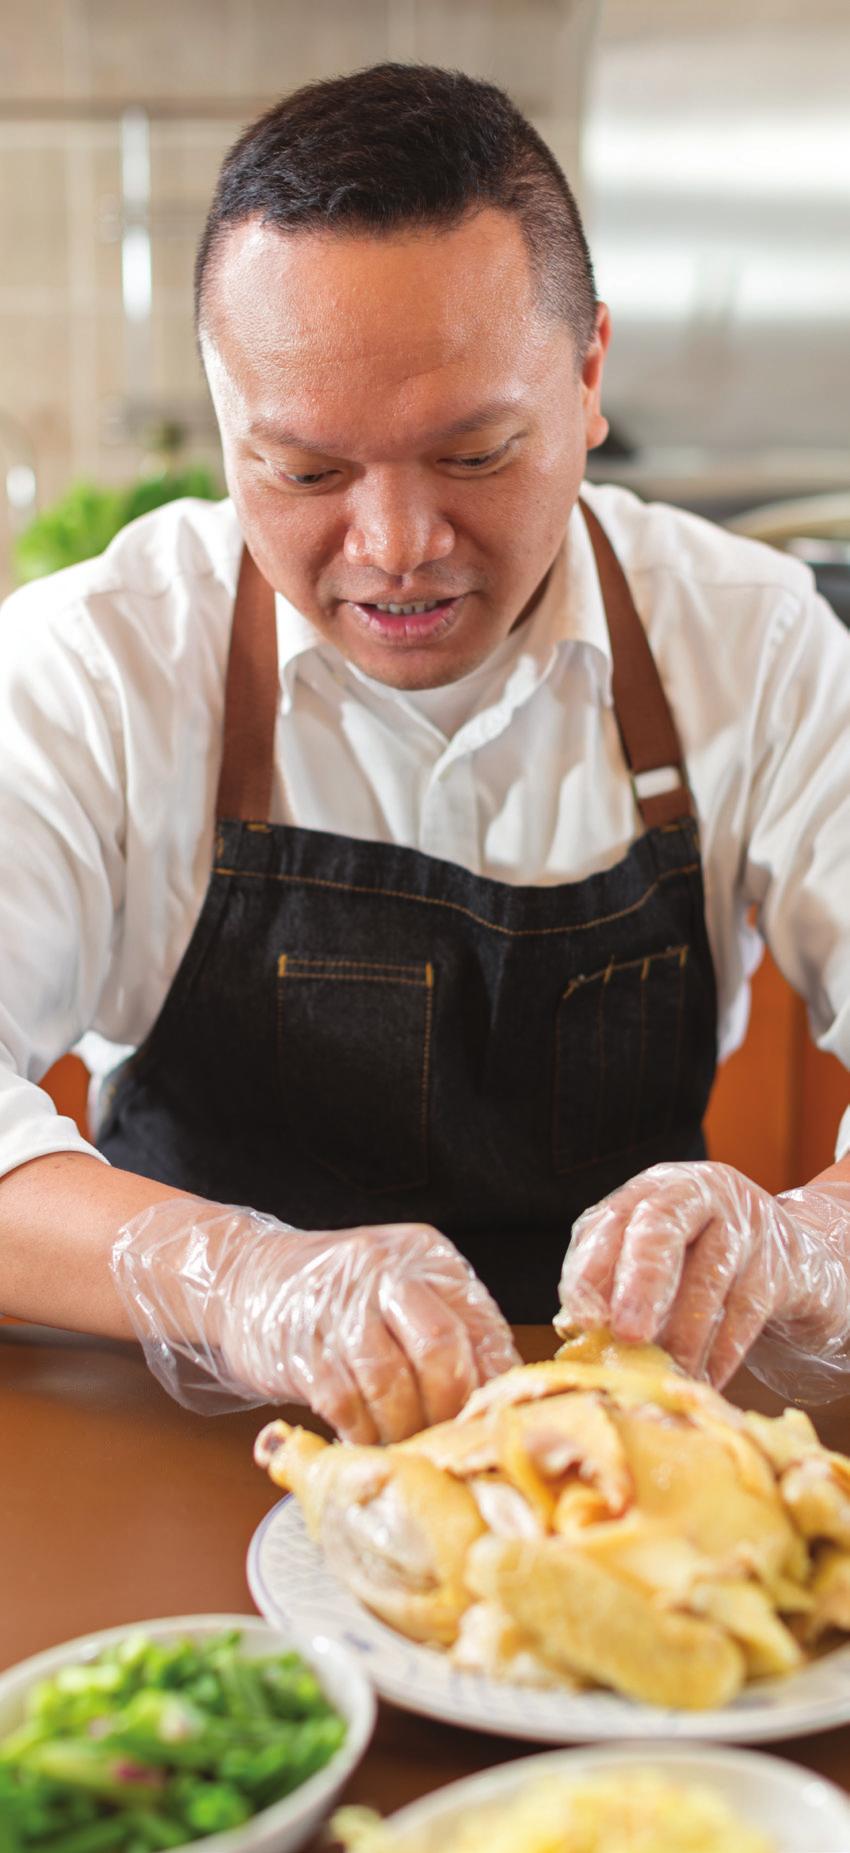 Practise makes perfect Frank Wong s interest in cooking also arose because of his mother, but rather than teaching him how to cook, she taught him how to appreciate eating.